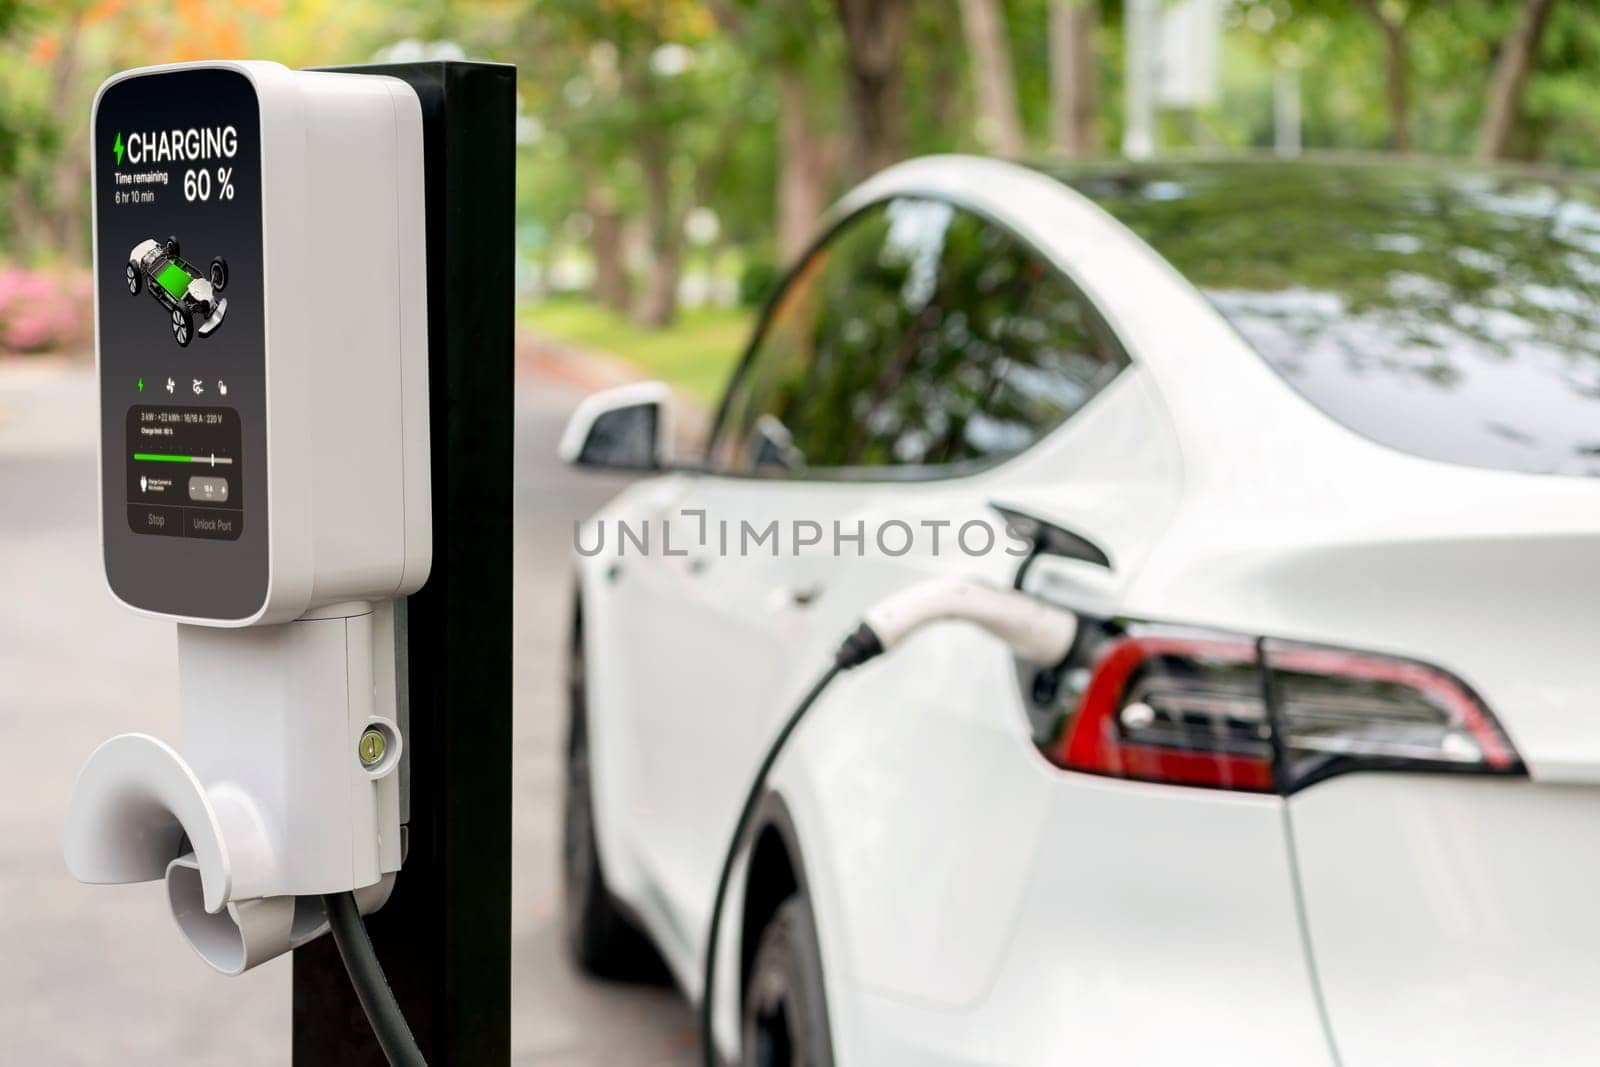 EV electric vehicle recharging battery from EV charging station in national park or outdoor forest scenic. Natural protection with eco friendly EV car travel in the summer woods. Exalt